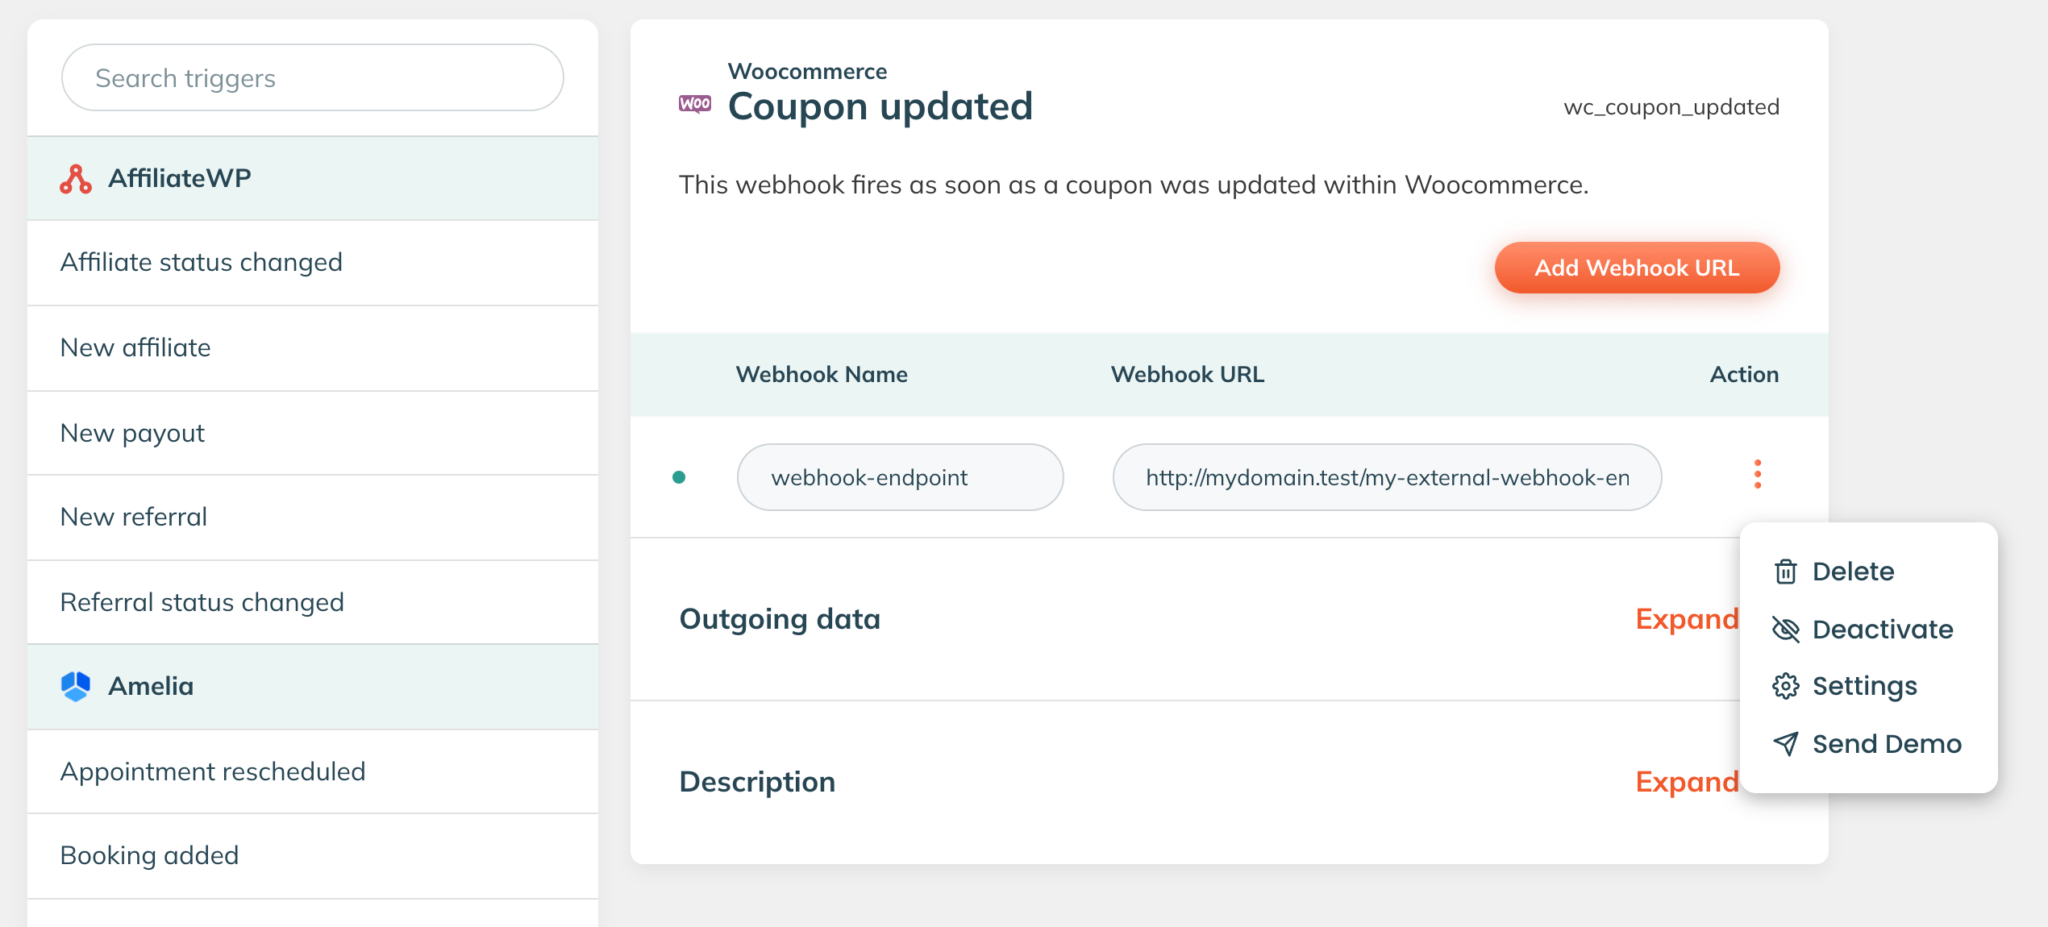 The WP Webhooks screen of the Affiliate status changed trigger